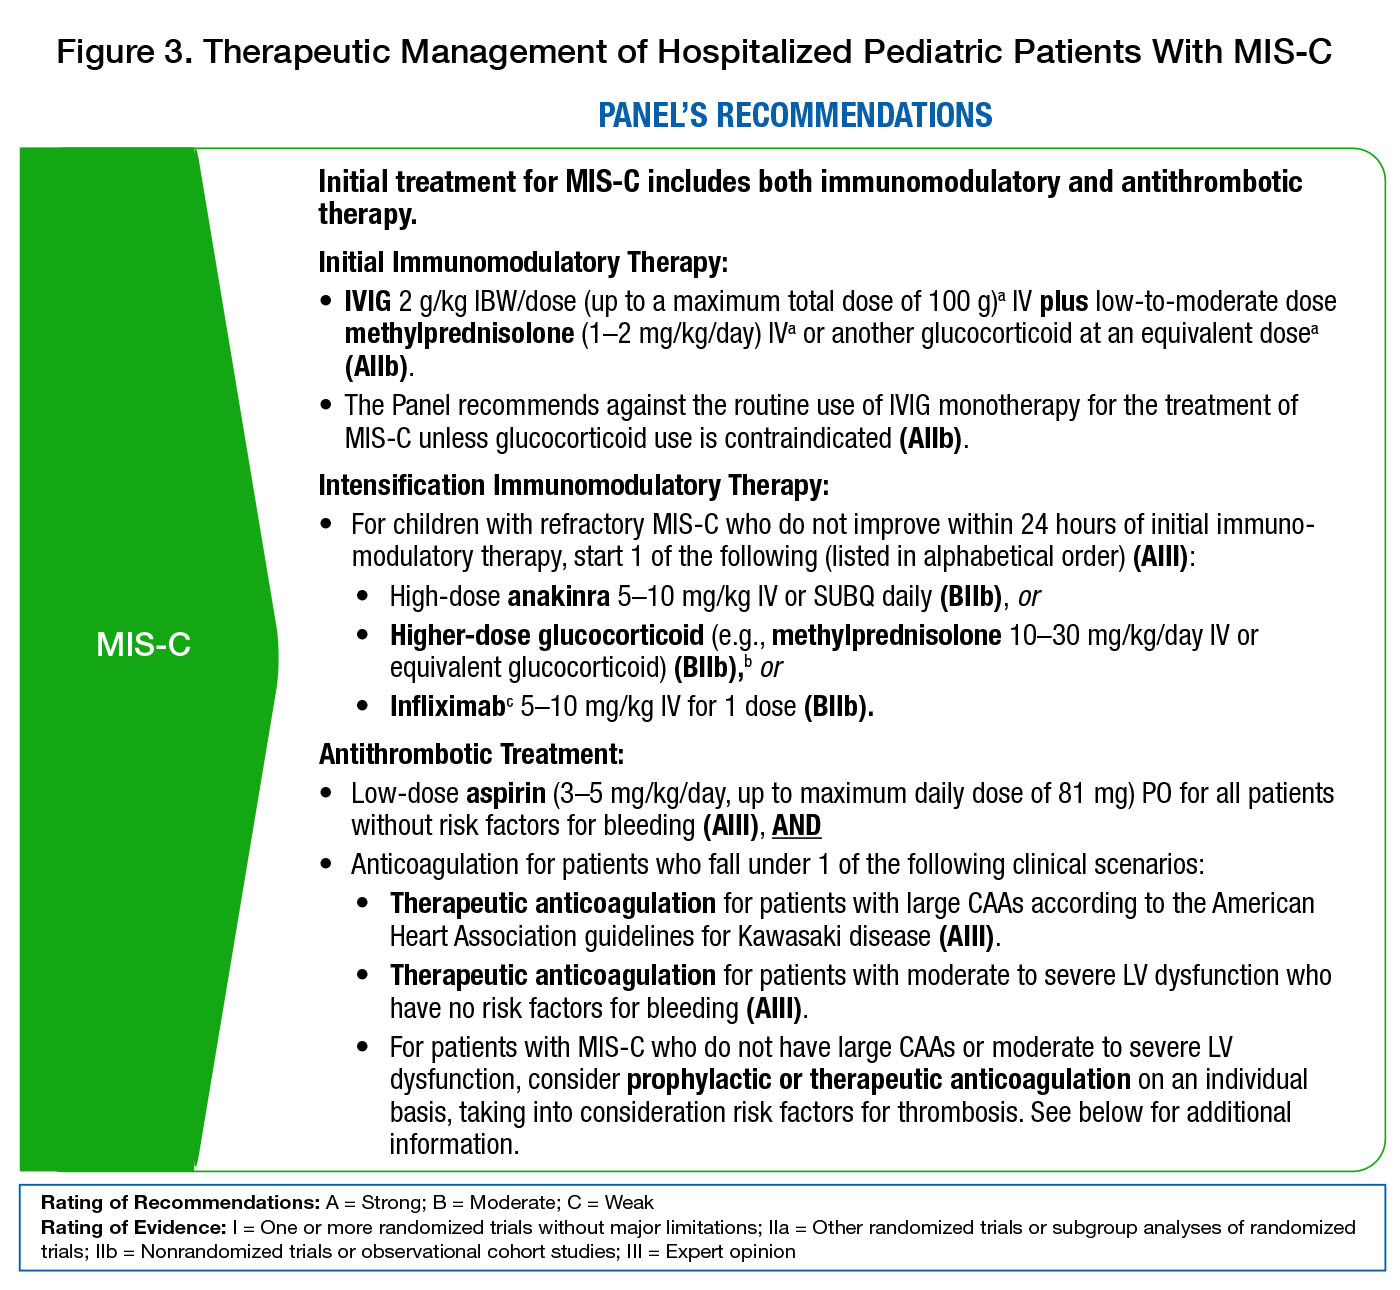 Therapeutic Management of Hospitalized Pediatric Patients With Multisystem Inflammatory Syndrome in Children (MIS-C) (With Discussion on Multisystem Inflammatory Syndrome in Adults [MIS-A])